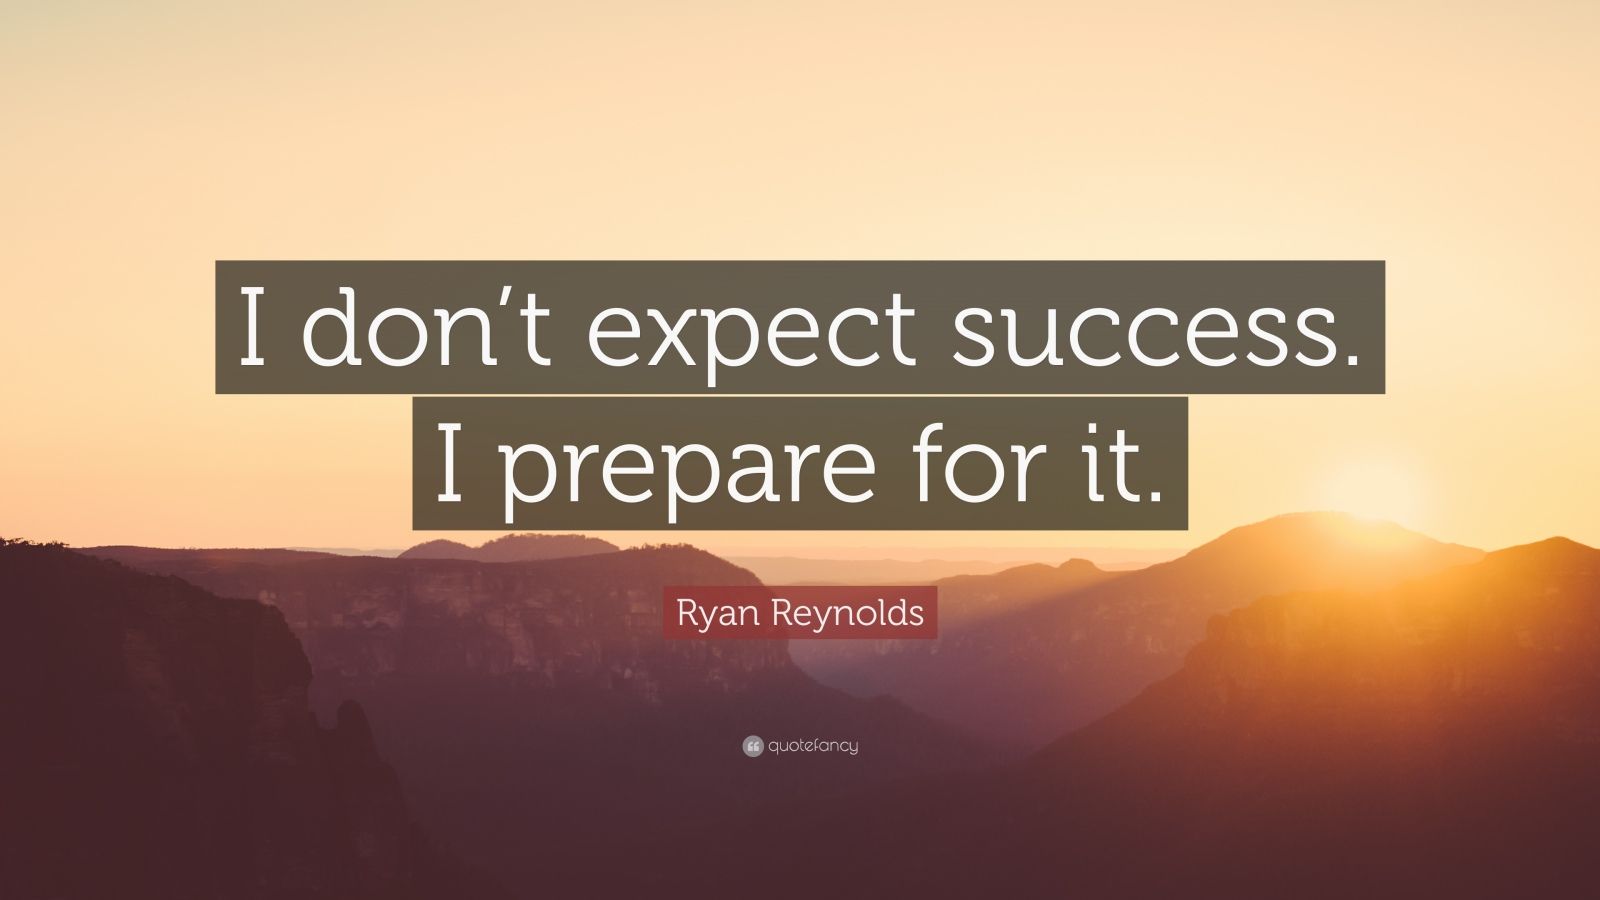 Ryan Reynolds Quote: “I don’t expect success. I prepare for it.”